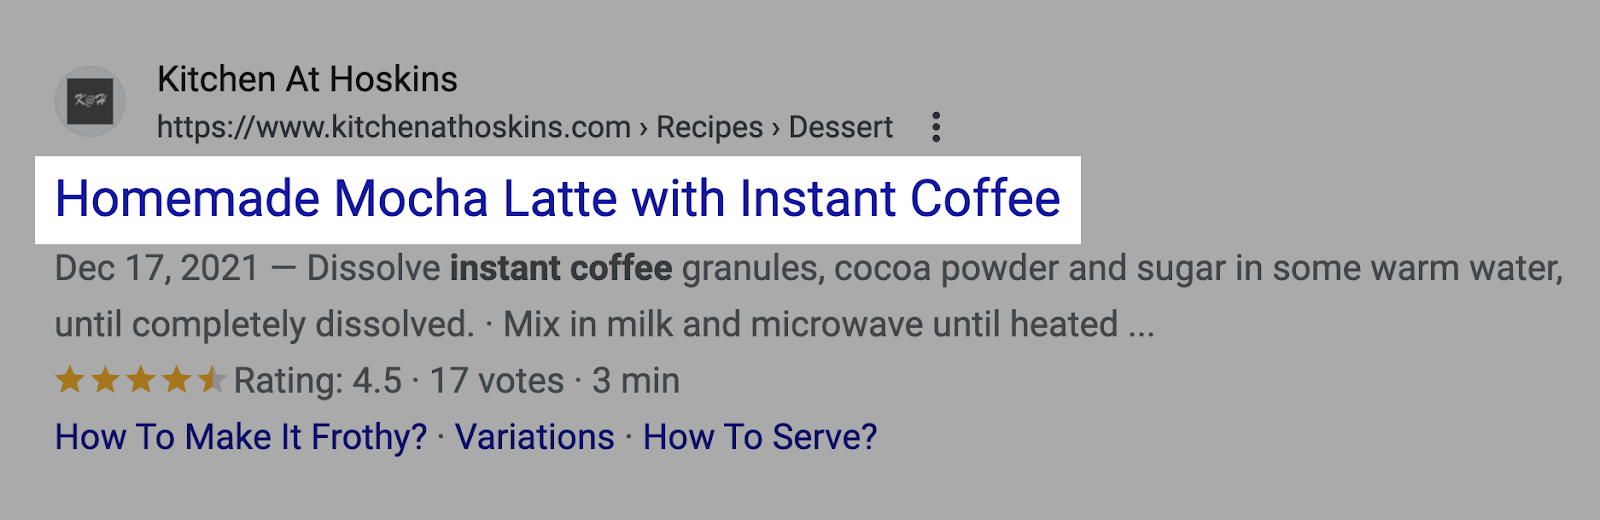 "Homemade Mocha Latte with Instant Coffee" title tag highlighted on Google SERP